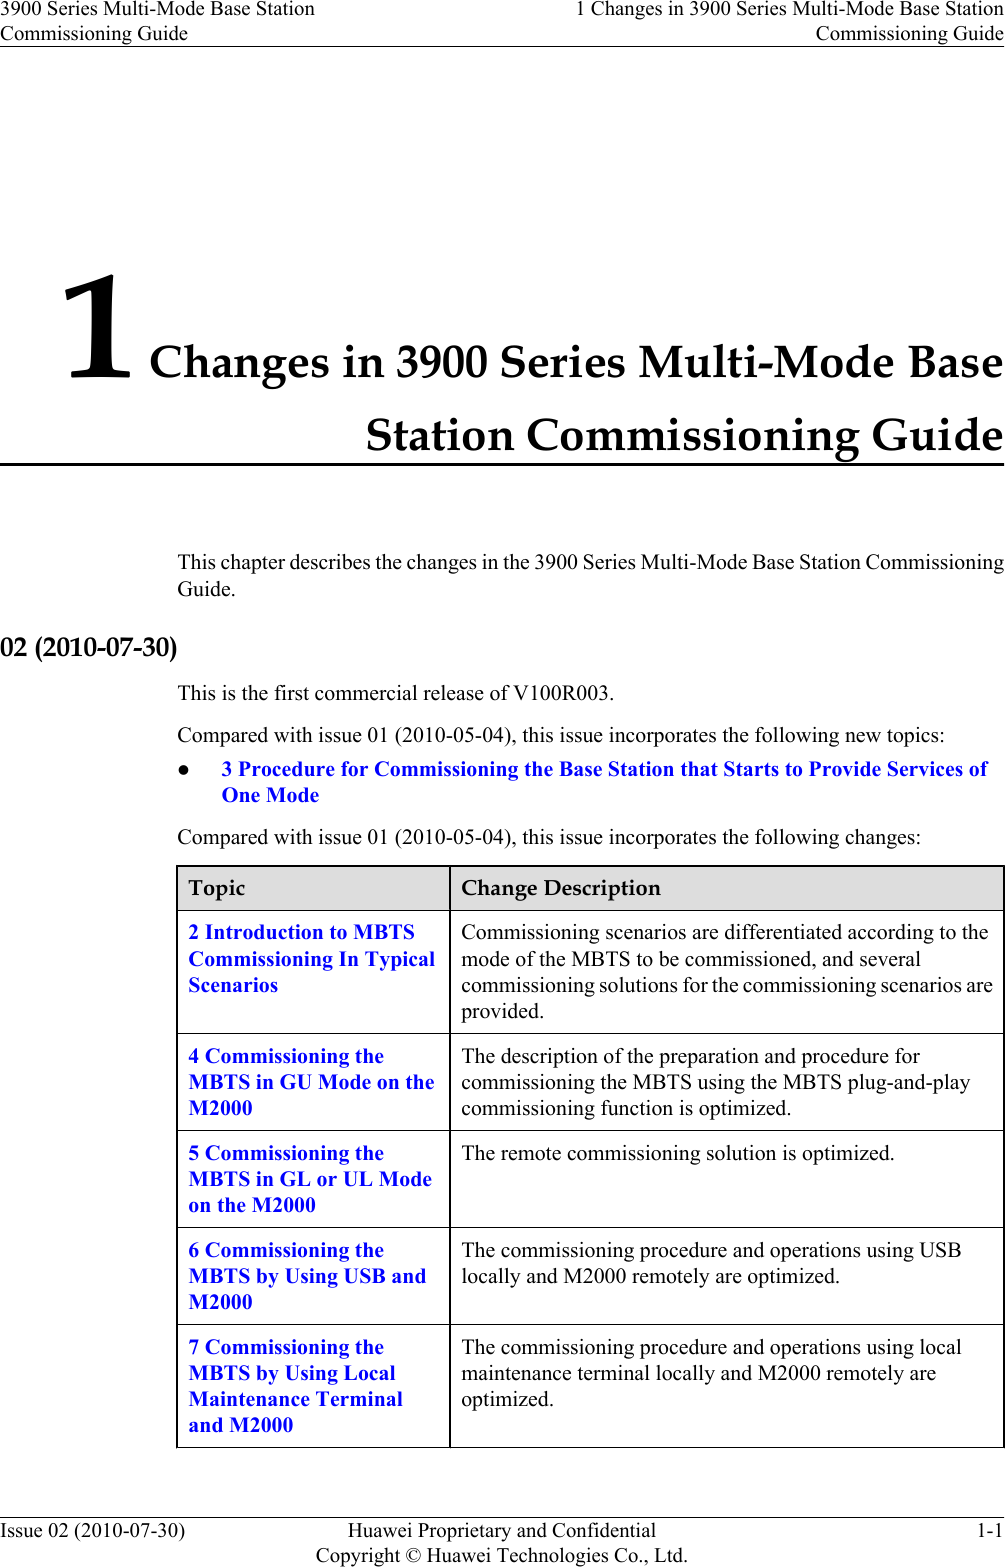 1 Changes in 3900 Series Multi-Mode BaseStation Commissioning GuideThis chapter describes the changes in the 3900 Series Multi-Mode Base Station CommissioningGuide.02 (2010-07-30)This is the first commercial release of V100R003.Compared with issue 01 (2010-05-04), this issue incorporates the following new topics:l3 Procedure for Commissioning the Base Station that Starts to Provide Services ofOne ModeCompared with issue 01 (2010-05-04), this issue incorporates the following changes:Topic Change Description2 Introduction to MBTSCommissioning In TypicalScenariosCommissioning scenarios are differentiated according to themode of the MBTS to be commissioned, and severalcommissioning solutions for the commissioning scenarios areprovided.4 Commissioning theMBTS in GU Mode on theM2000The description of the preparation and procedure forcommissioning the MBTS using the MBTS plug-and-playcommissioning function is optimized.5 Commissioning theMBTS in GL or UL Modeon the M2000The remote commissioning solution is optimized.6 Commissioning theMBTS by Using USB andM2000The commissioning procedure and operations using USBlocally and M2000 remotely are optimized.7 Commissioning theMBTS by Using LocalMaintenance Terminaland M2000The commissioning procedure and operations using localmaintenance terminal locally and M2000 remotely areoptimized. 3900 Series Multi-Mode Base StationCommissioning Guide1 Changes in 3900 Series Multi-Mode Base StationCommissioning GuideIssue 02 (2010-07-30) Huawei Proprietary and ConfidentialCopyright © Huawei Technologies Co., Ltd.1-1